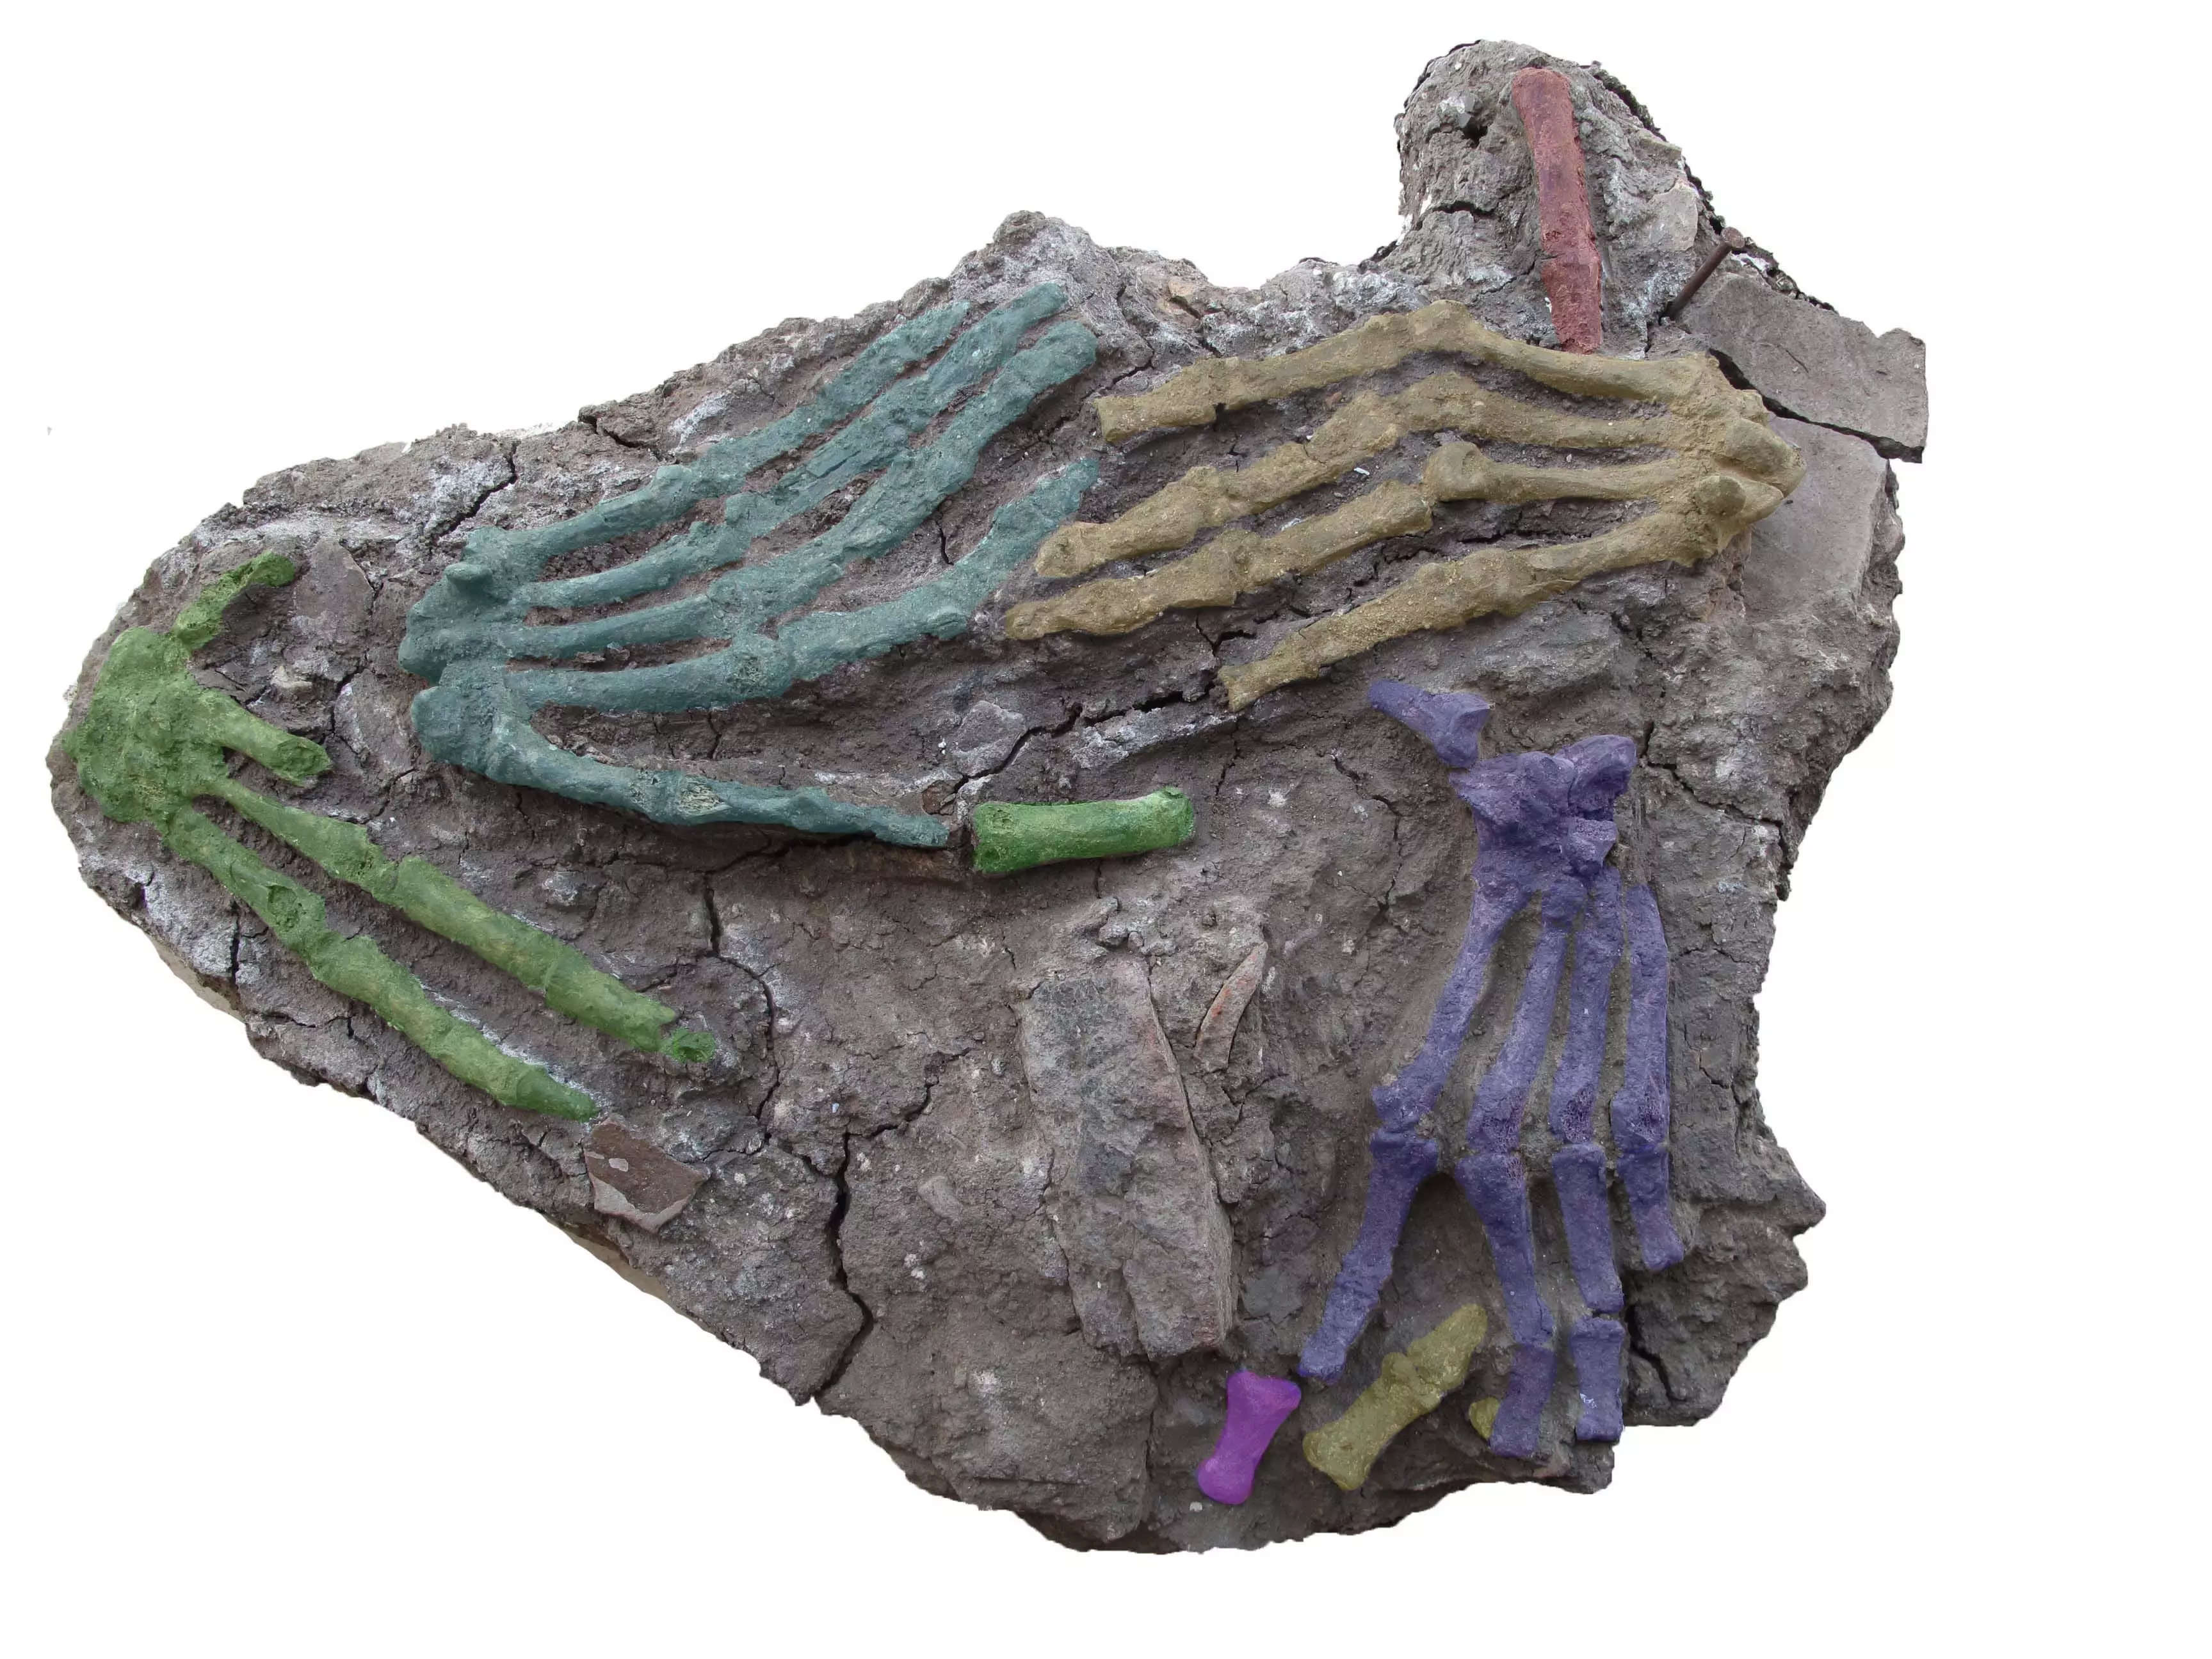 A colorised pictured shows the position of each of the hands in the soil.